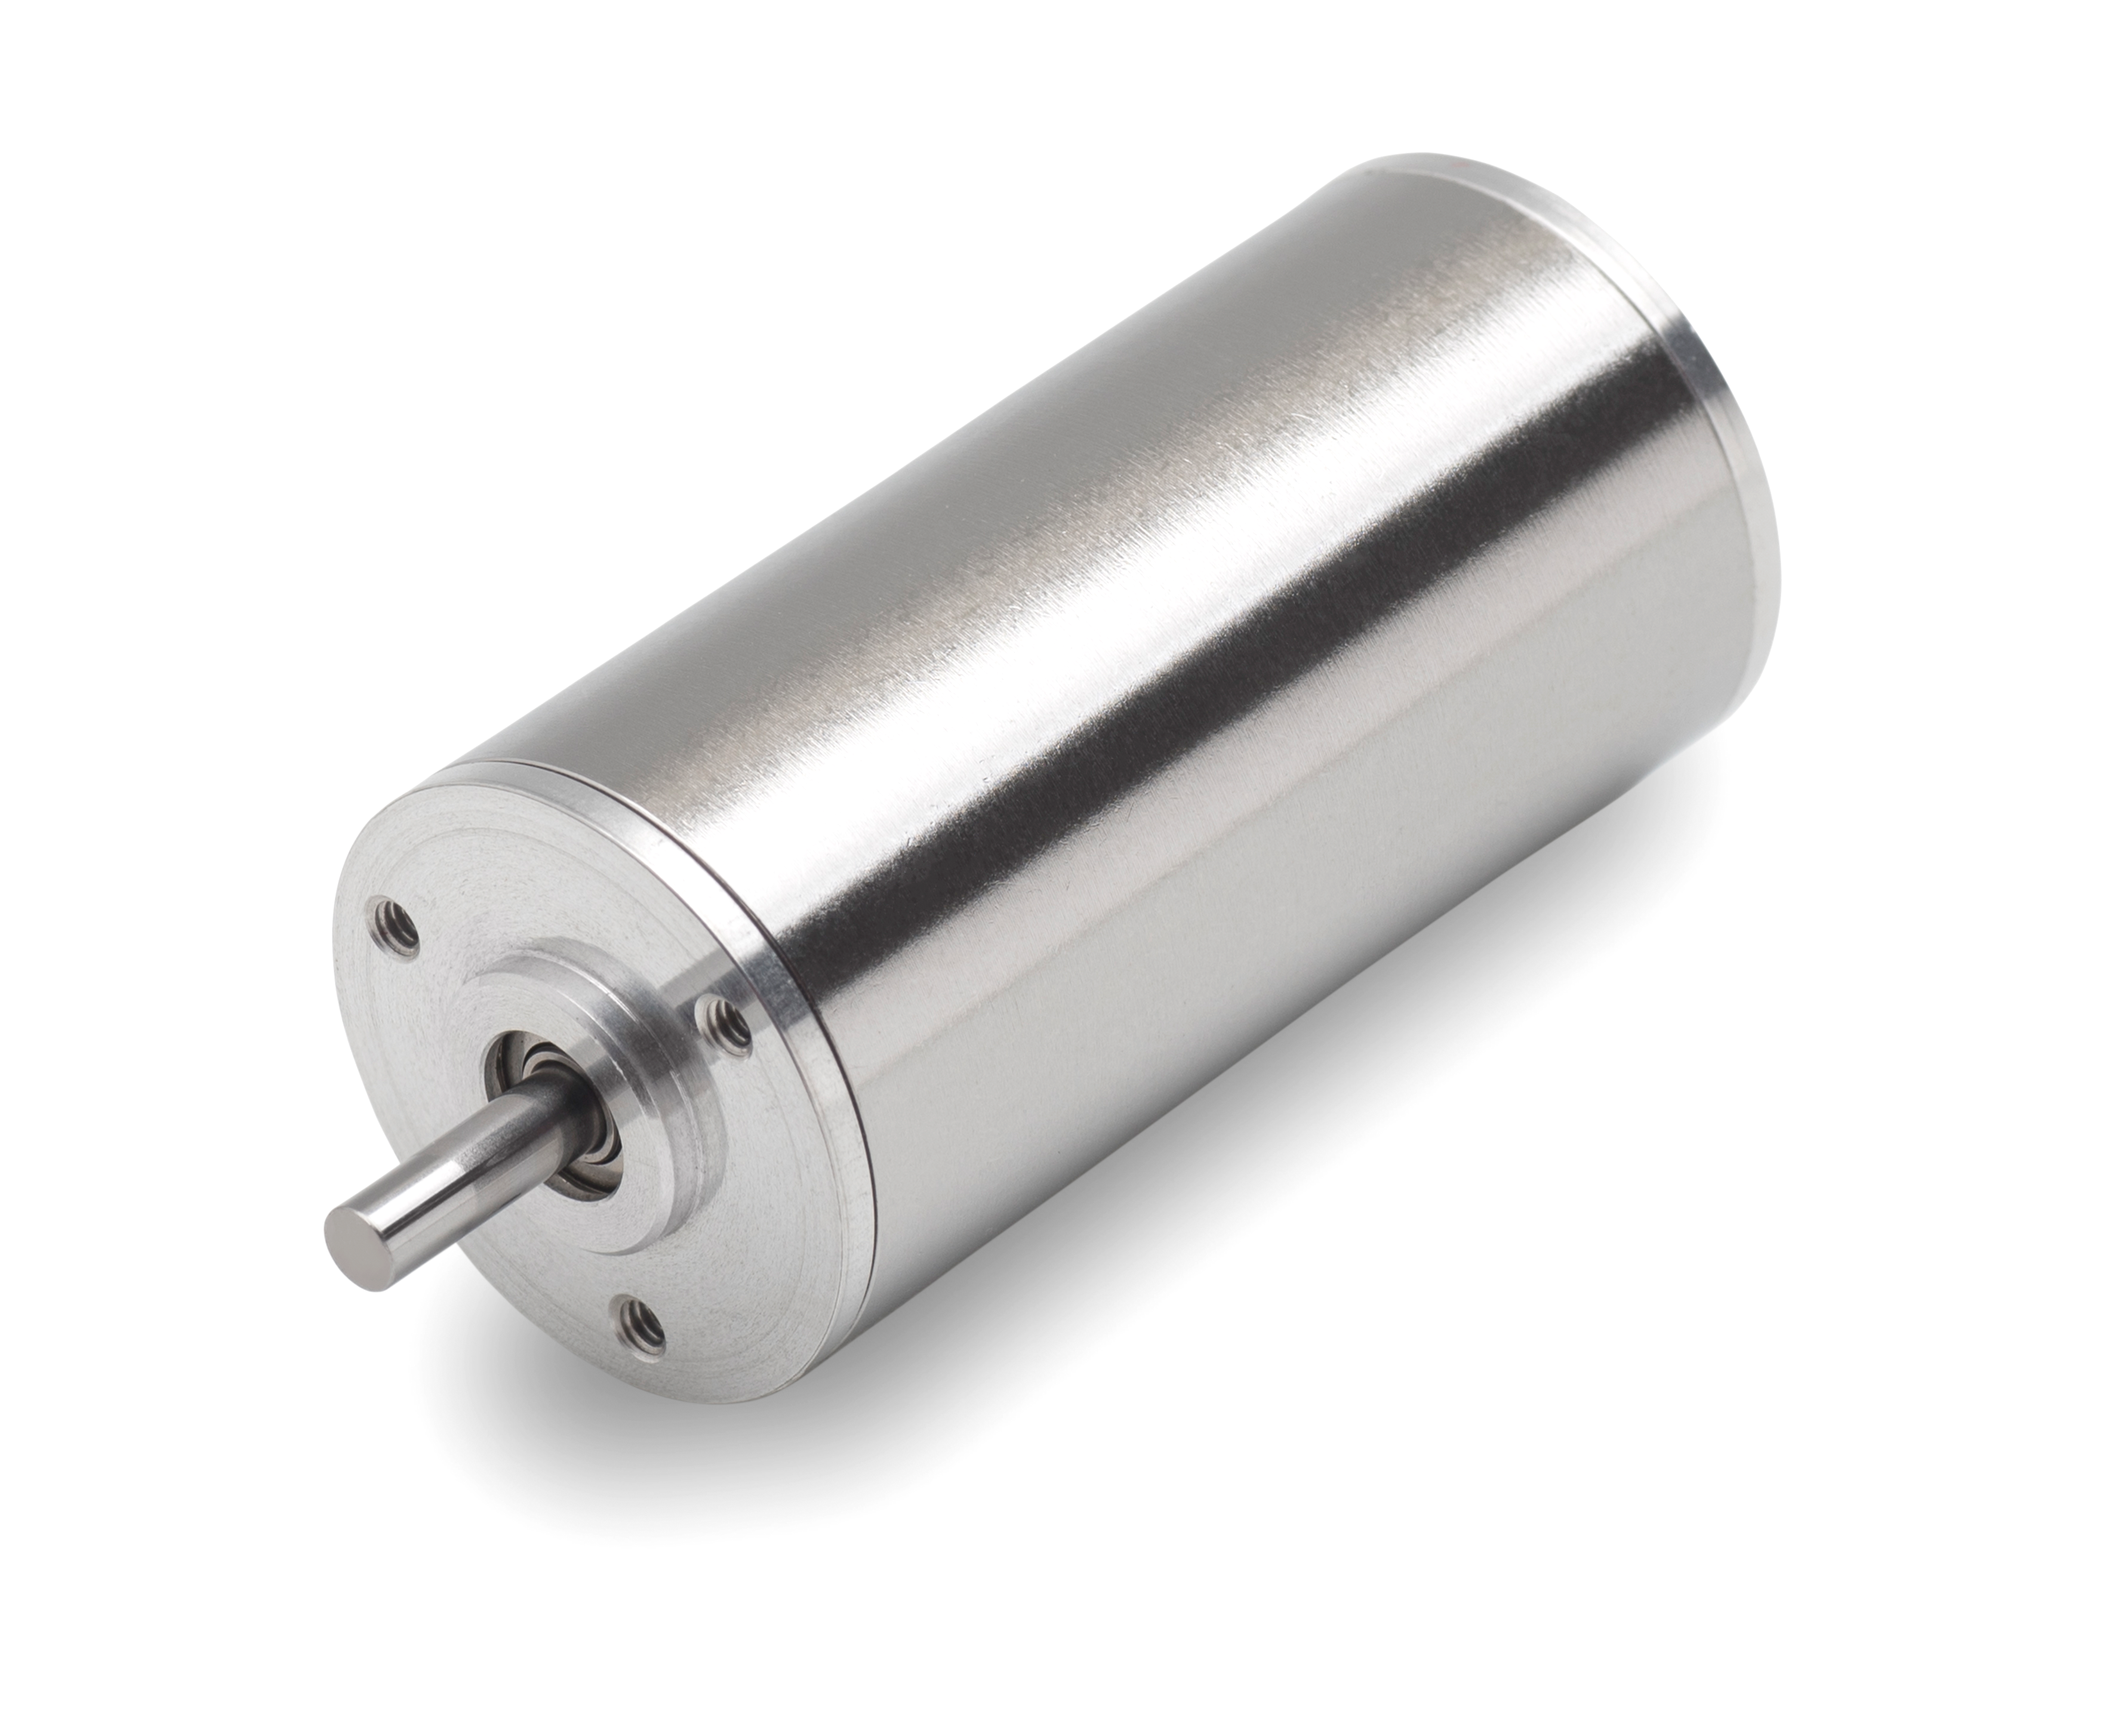 22ECA60 Brushless DC Motor is ideal for small and medium bone surgical hand tool.